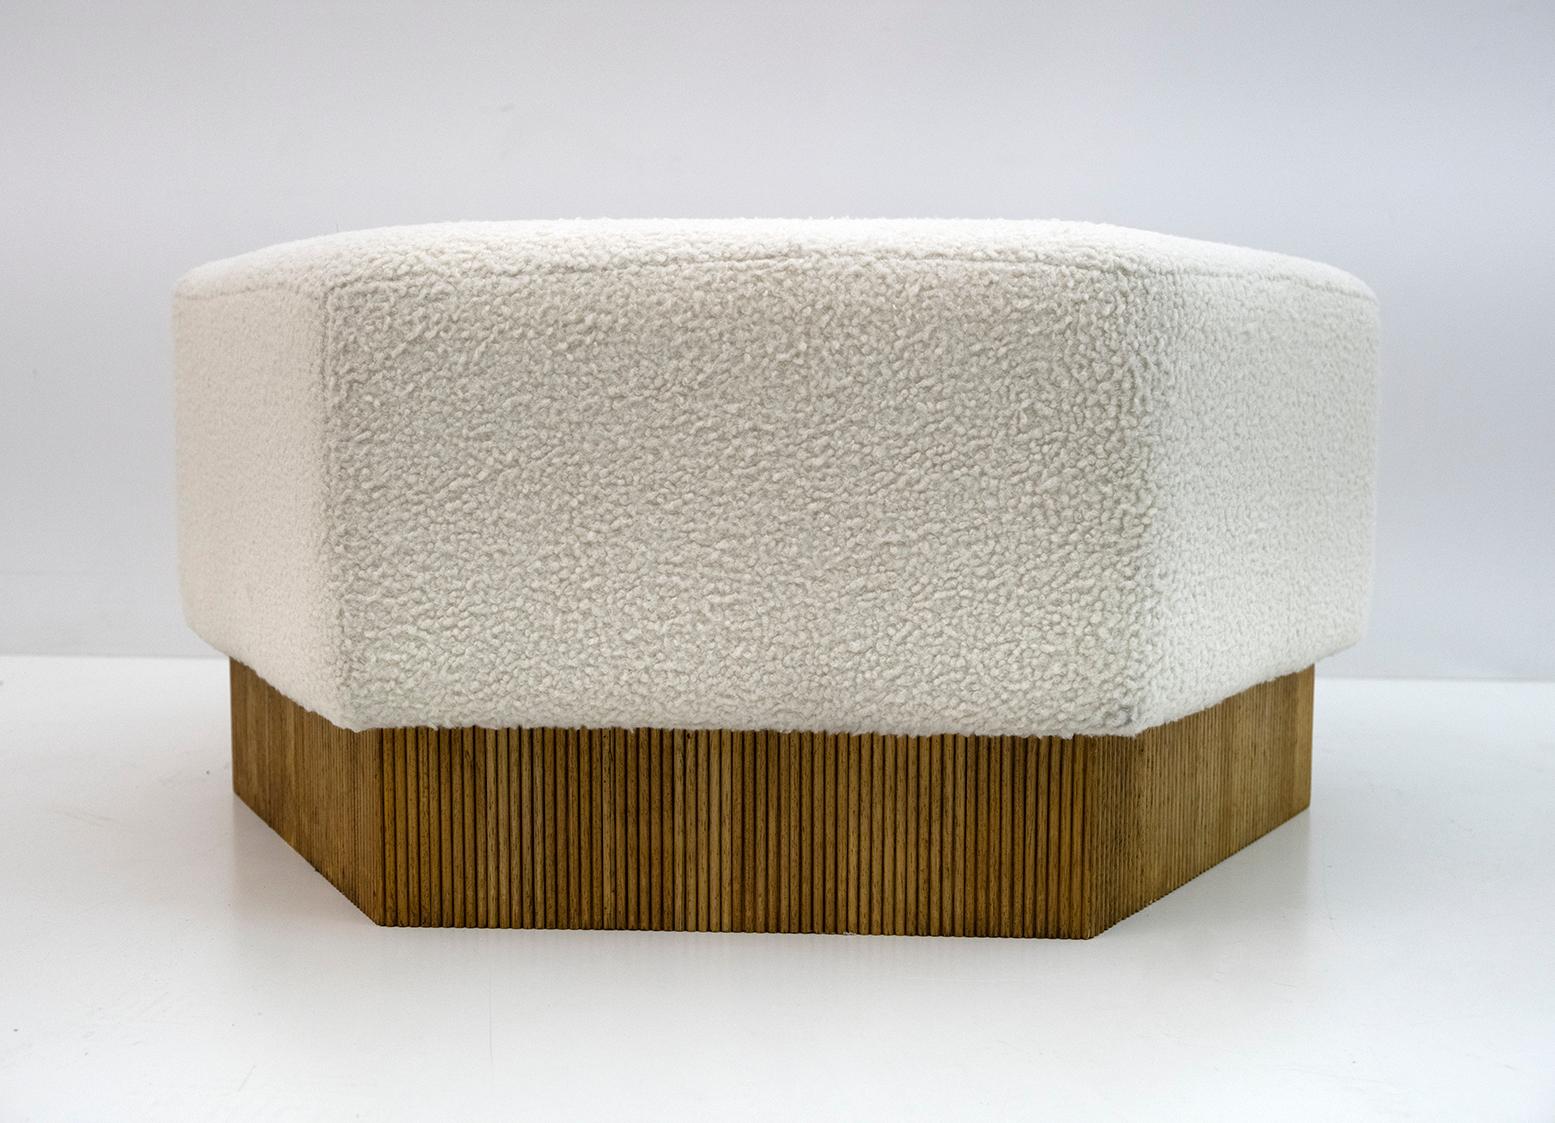 Bouclé Hexagonal Pouf in Soft White Boucle with Wooden Base, Italy